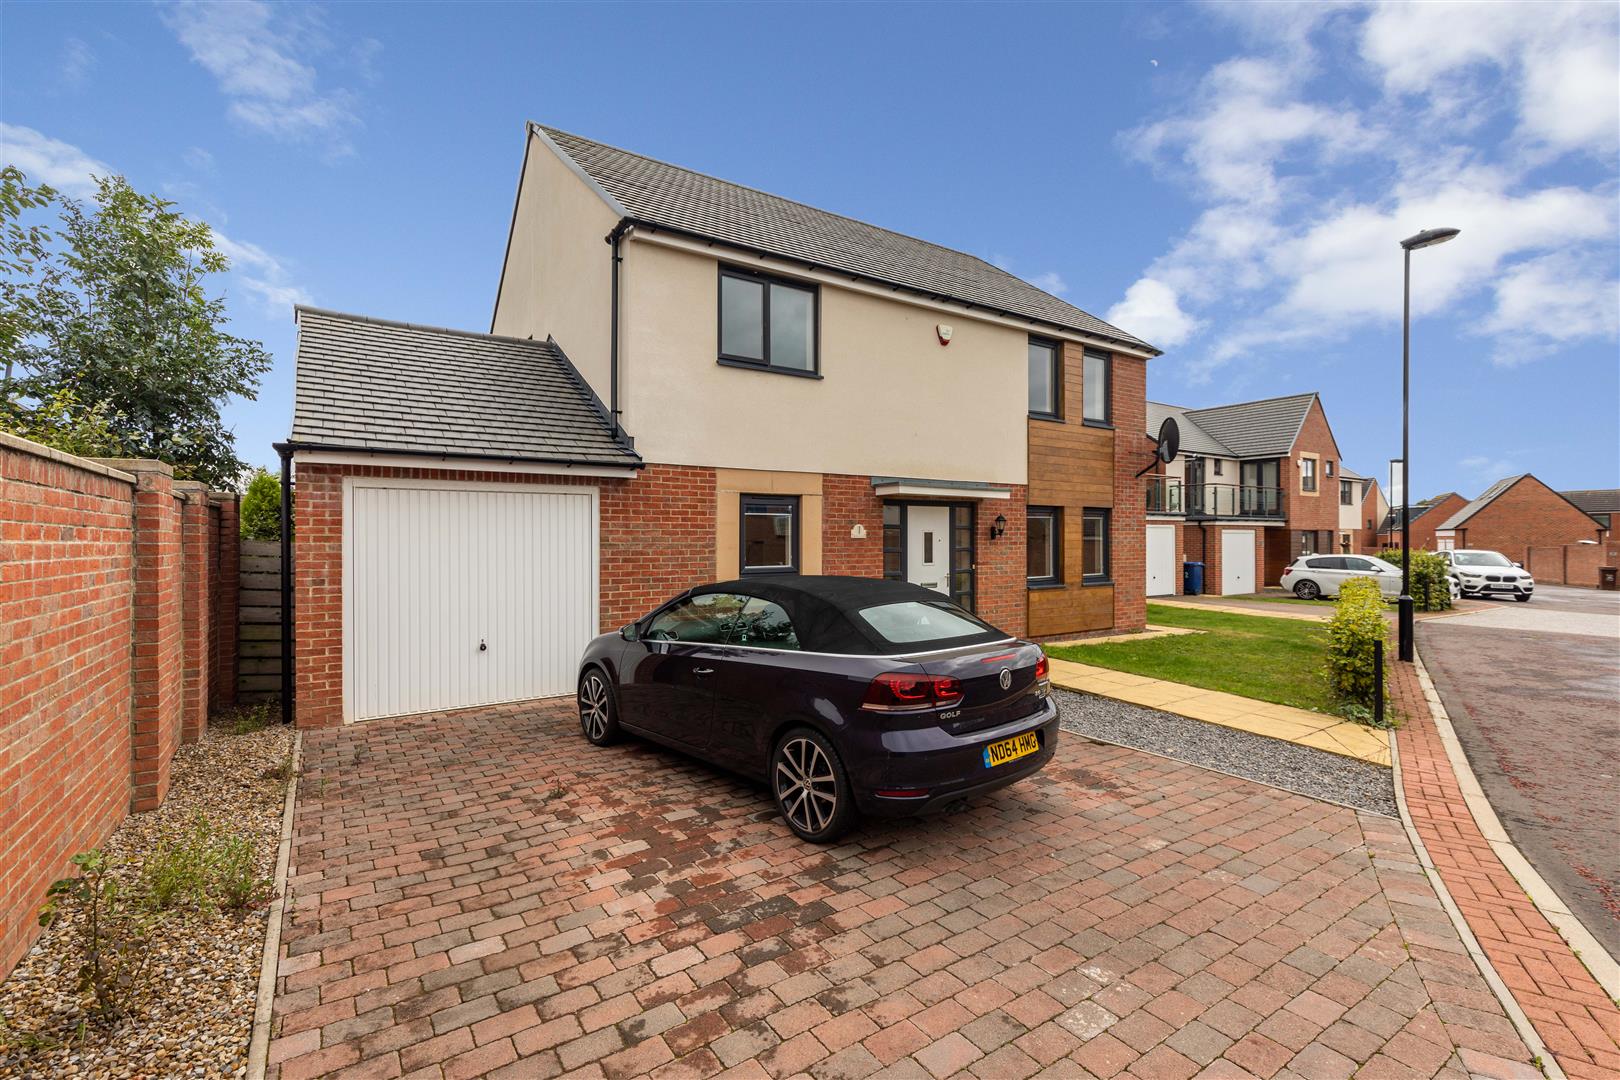 4 bed detached house for sale in Hethpool Court, Great Park 0